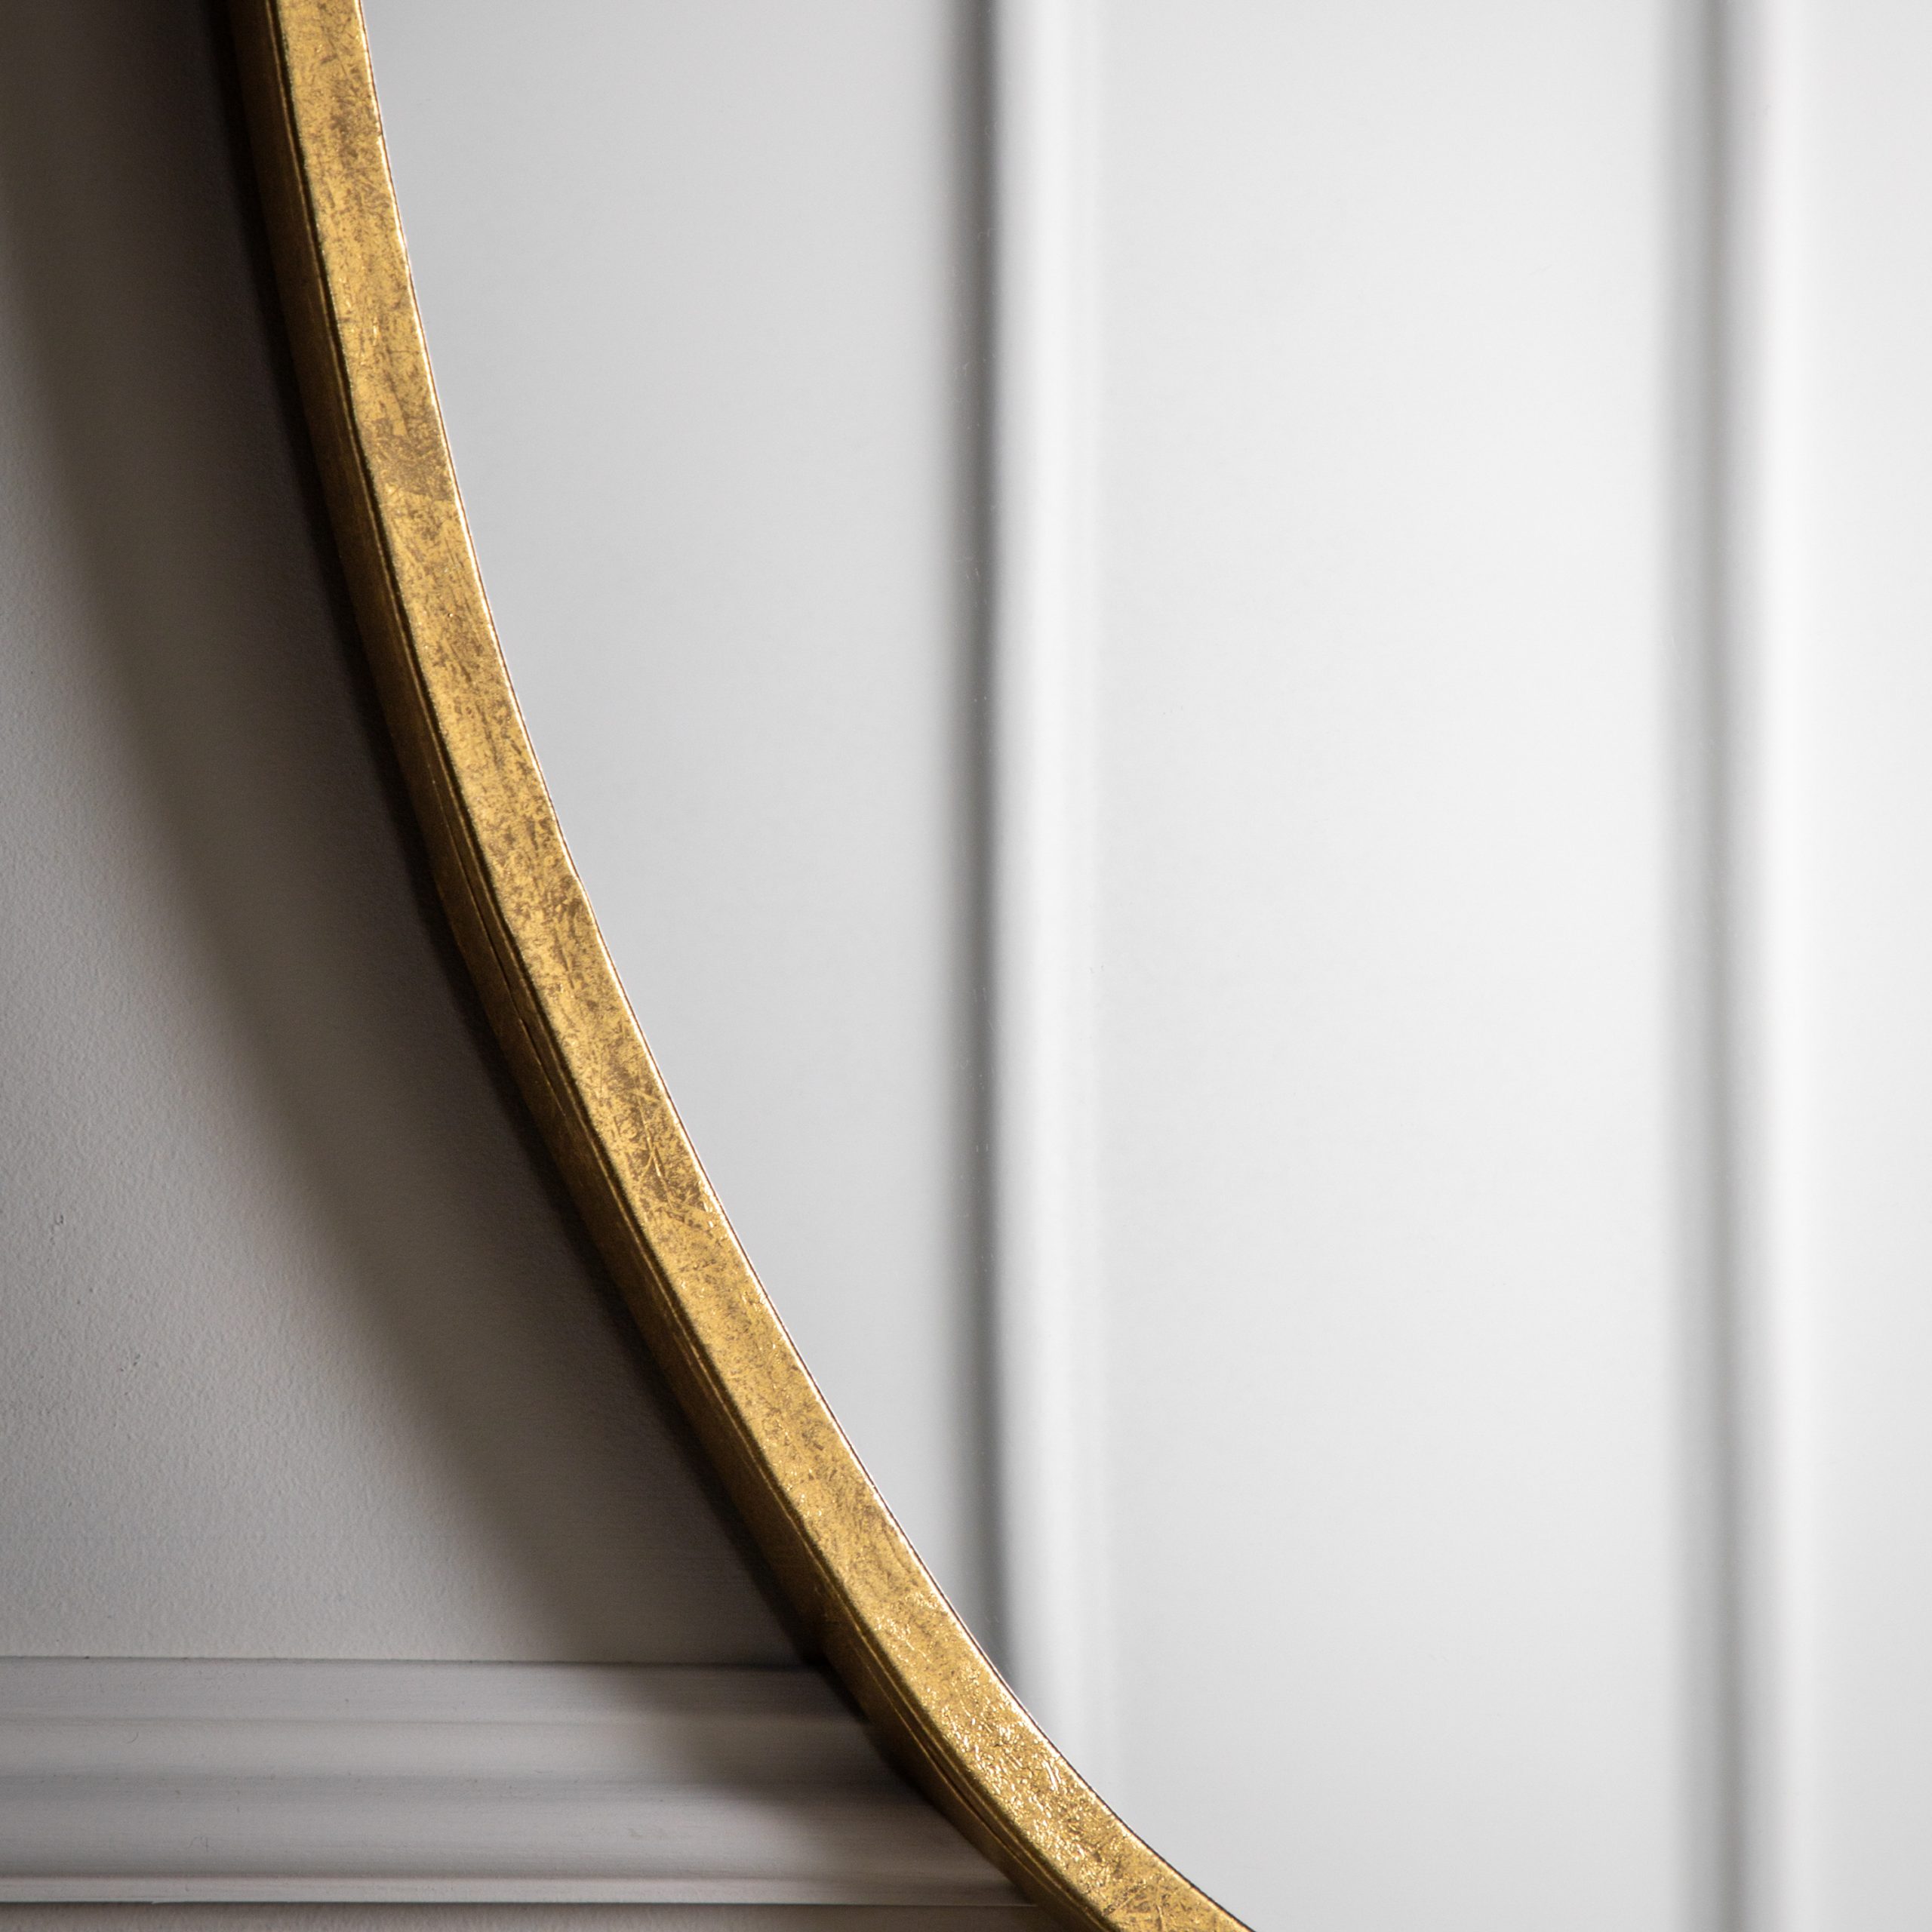 Gallery Direct Chattenden Mirror Gold | Shackletons